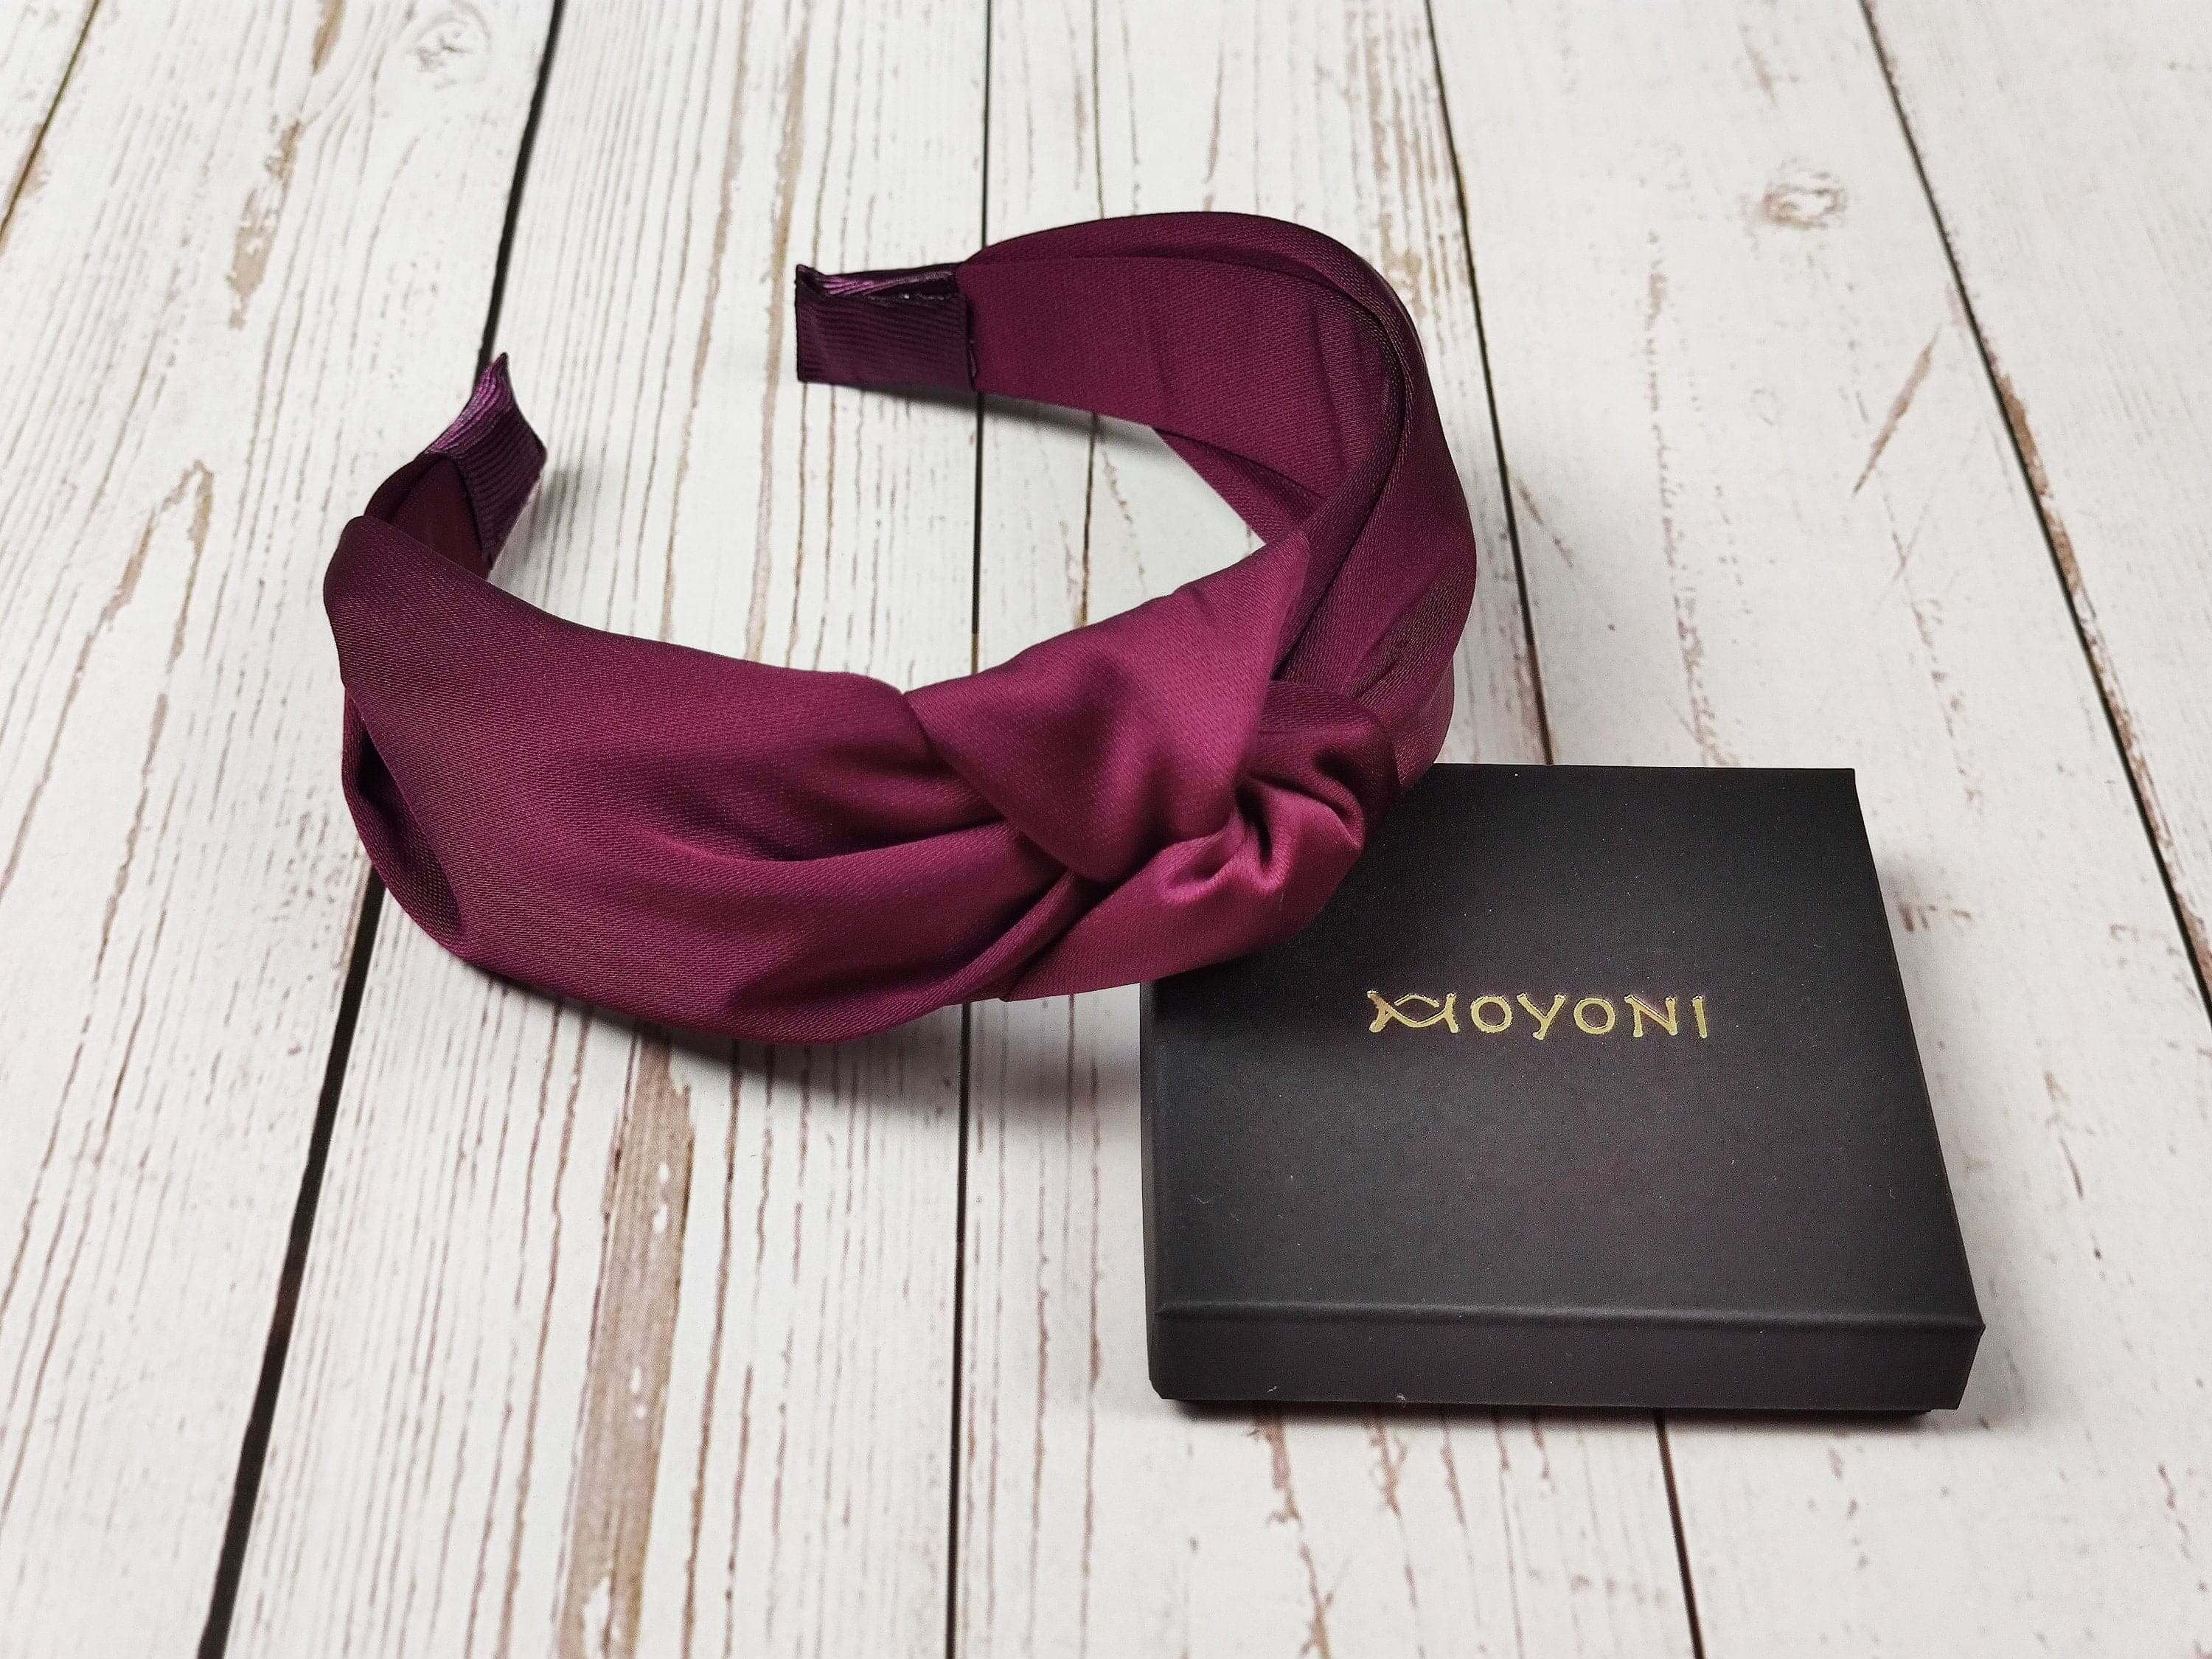 Make a statement with this dark cherry maroon color satin headband, featuring a chic knotted design.